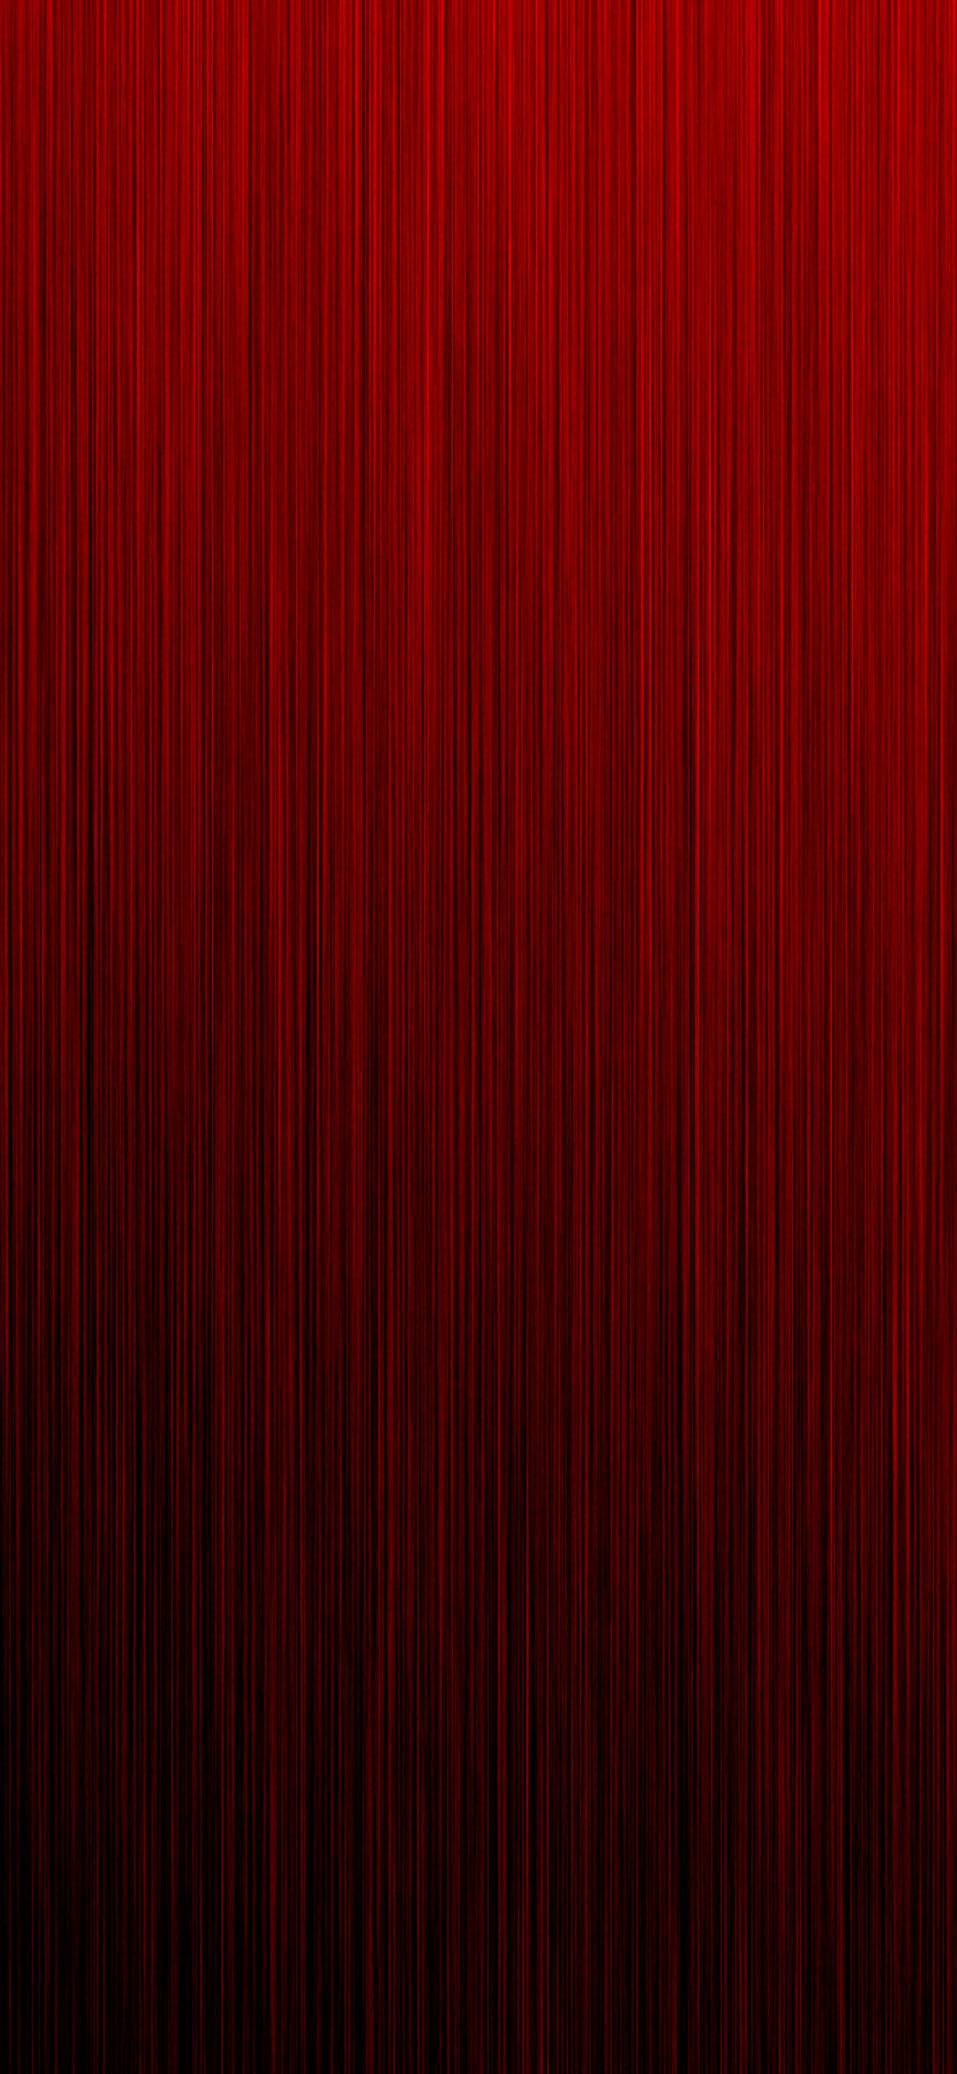 Red Background Wallpaper HD - 24